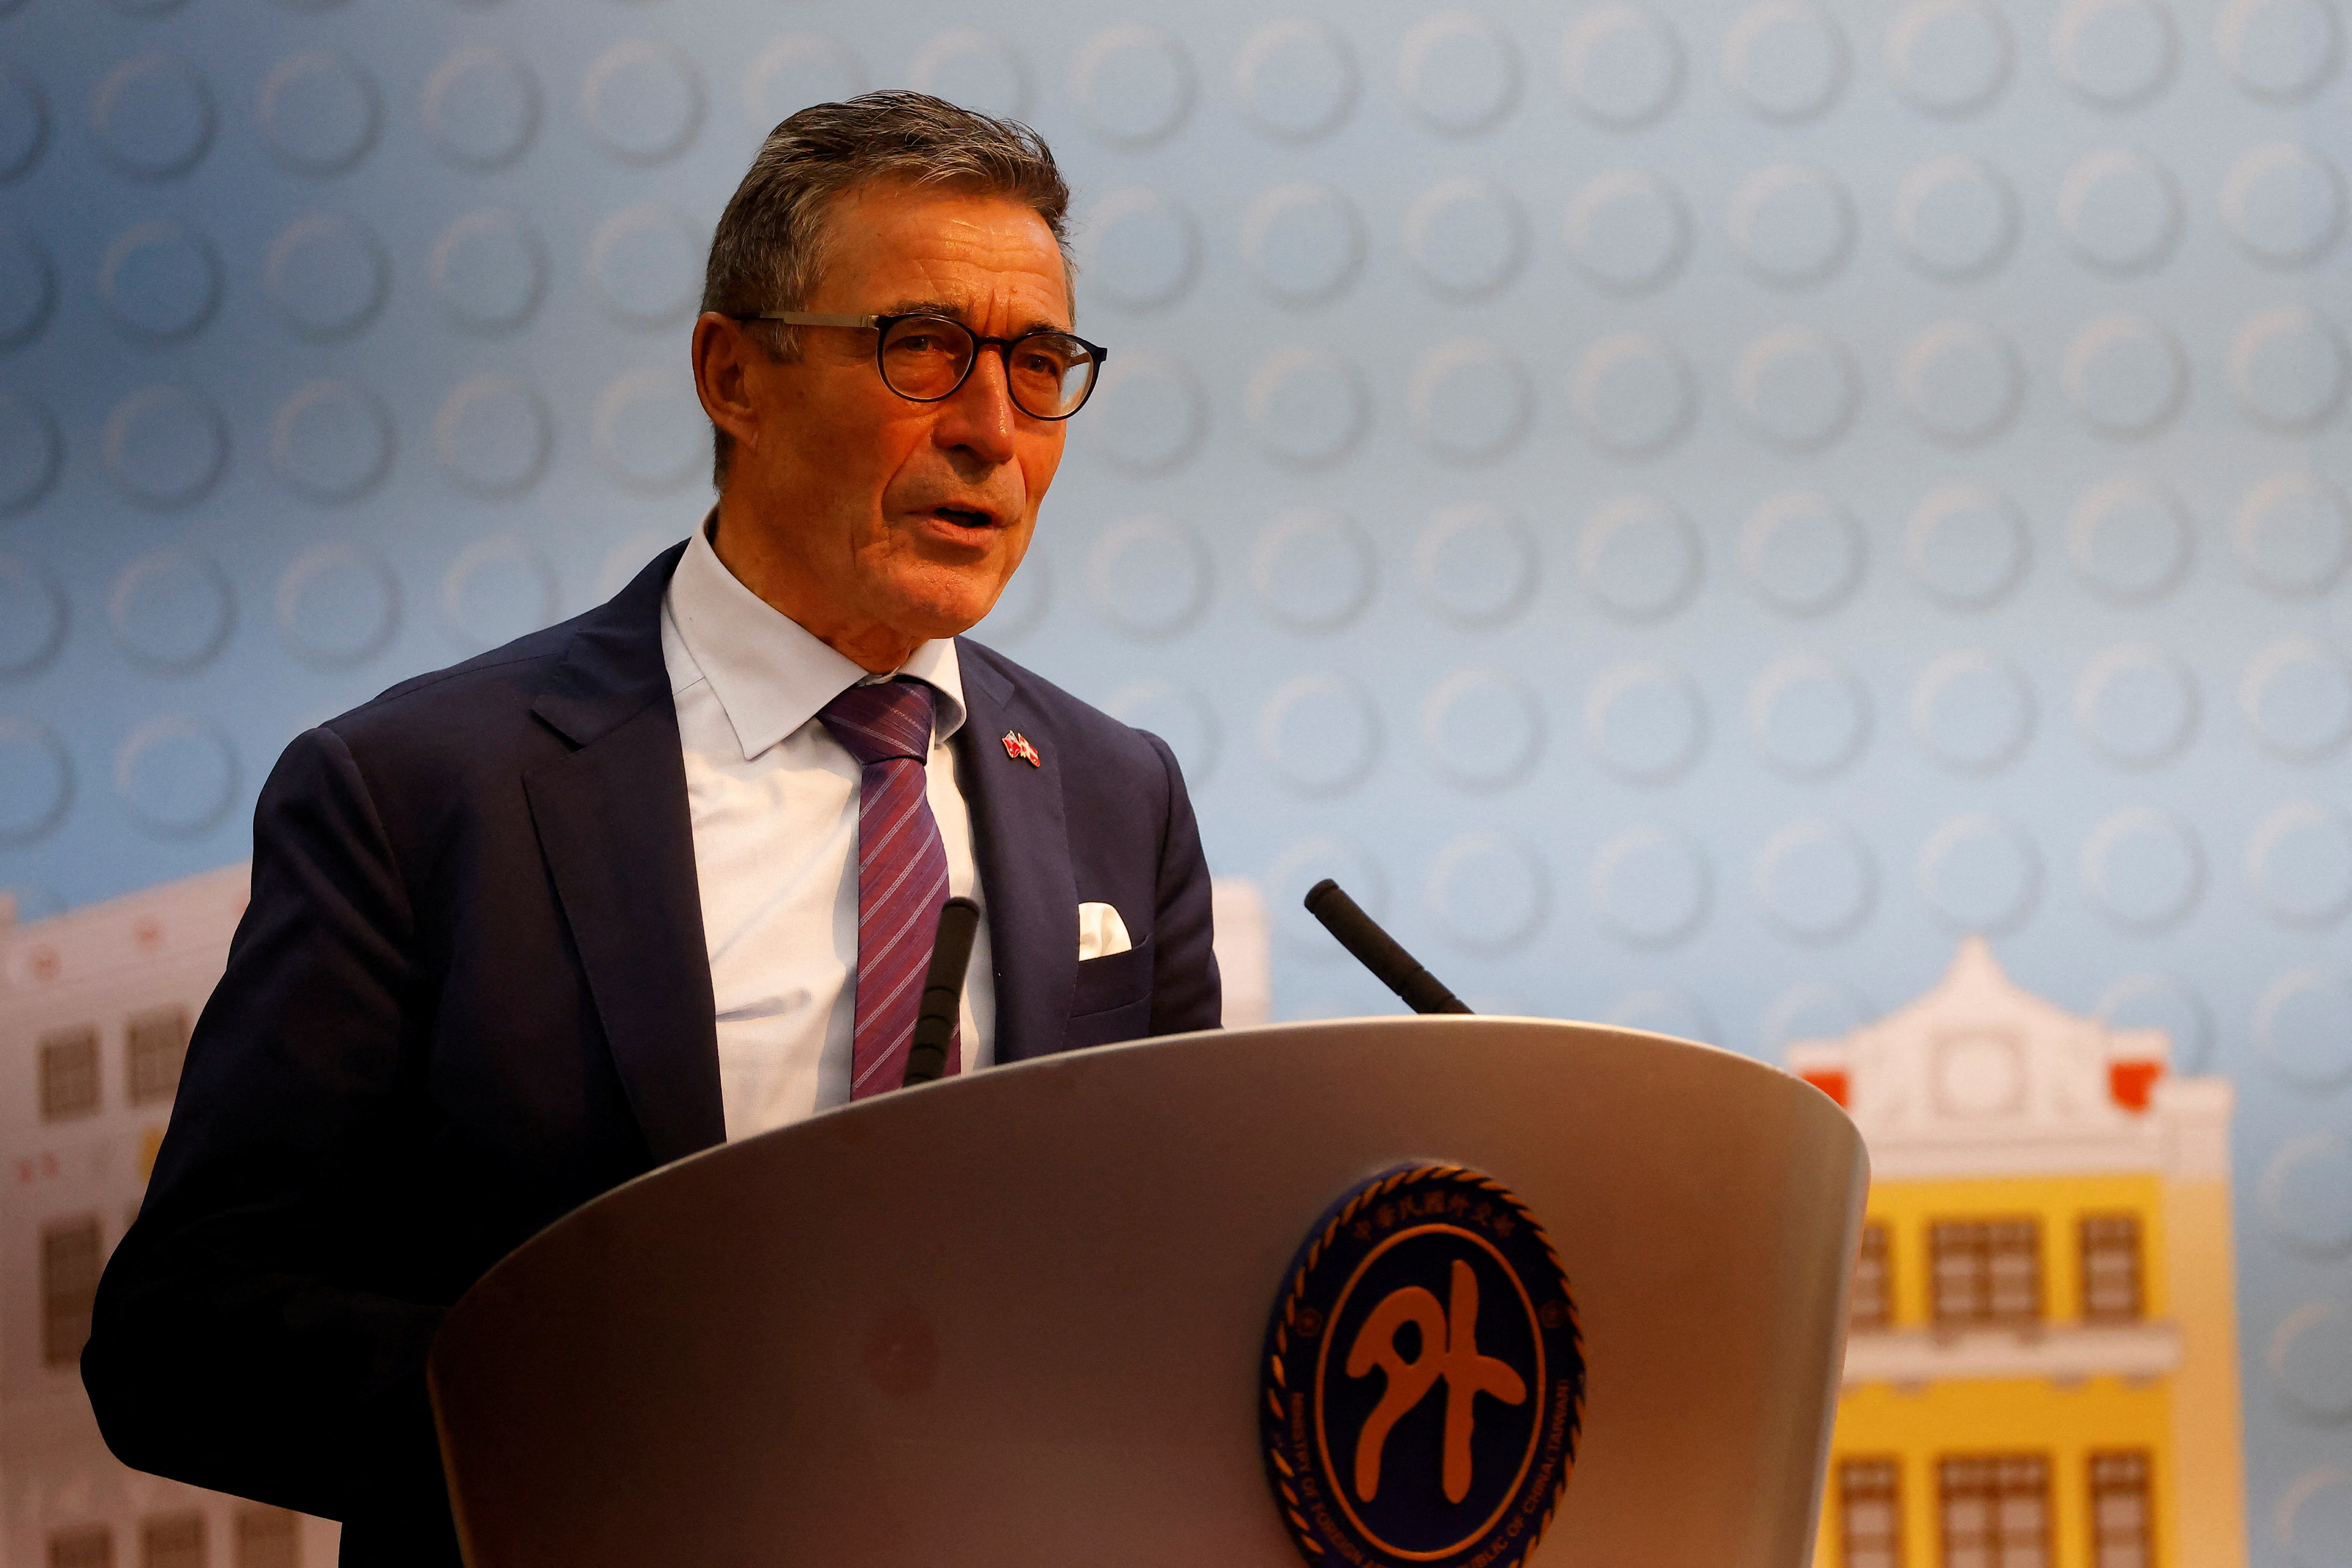 Former NATO Secretary-General Anders Fogh Rasmussen speaks to the media at a press event in Taipei